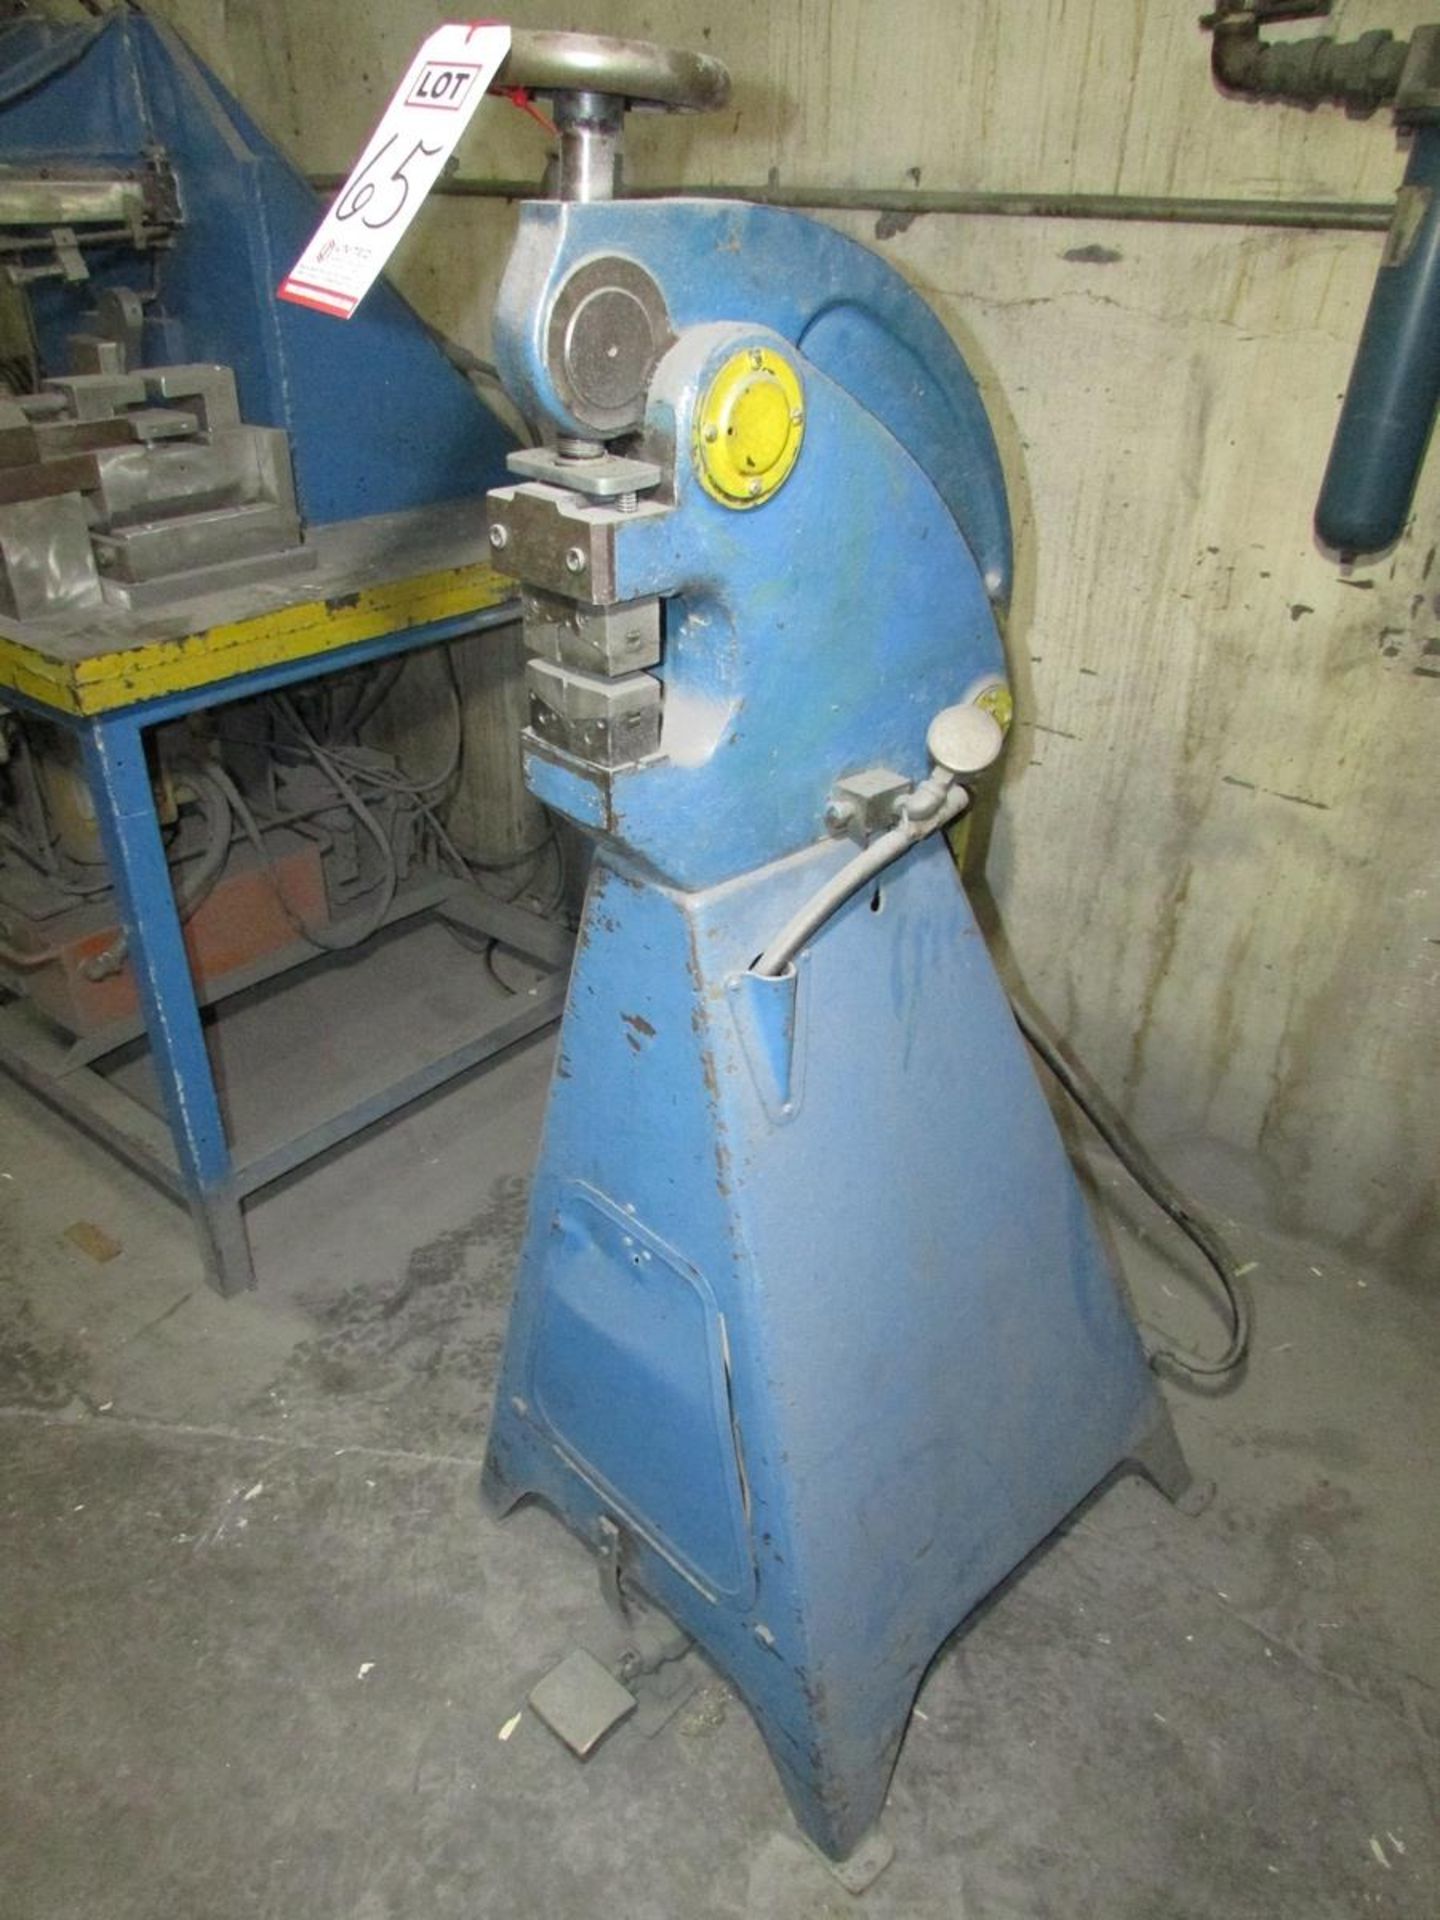 MARCHANT MACHINE CORP SHRINKING AND STRETCHING MACHINE, MODEL 4A, S/N 235 - Image 5 of 10